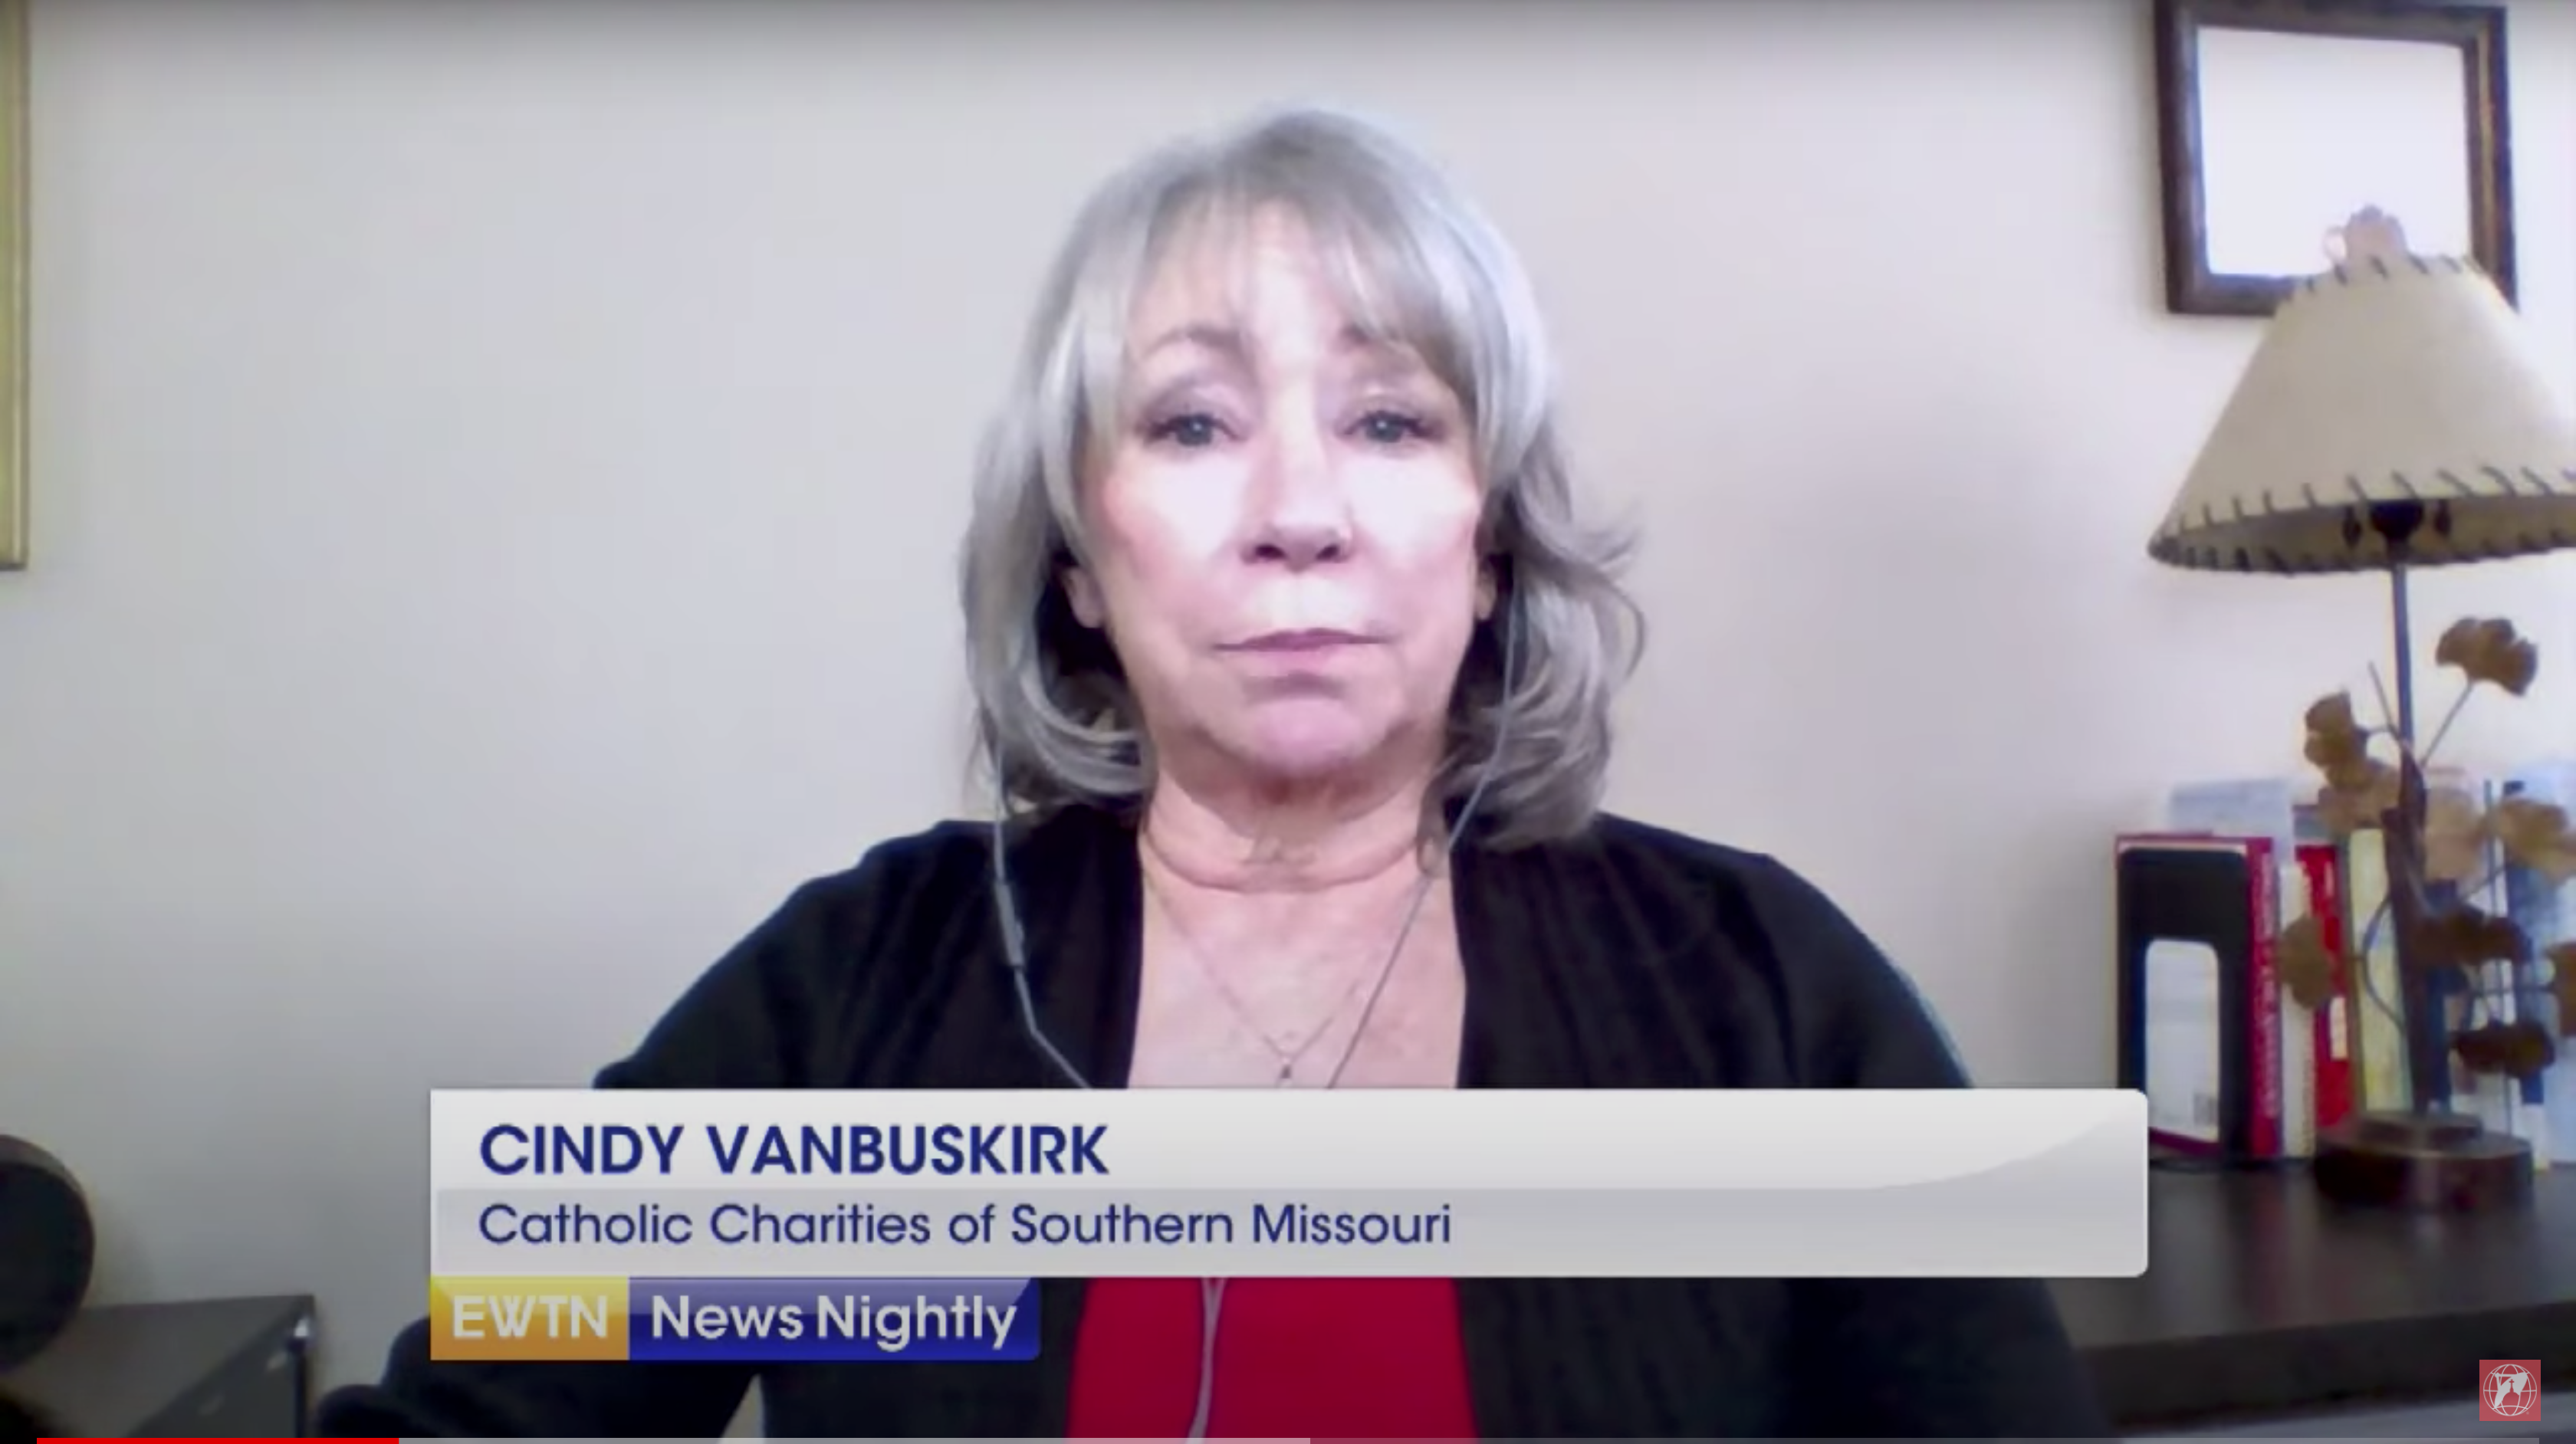 IN THE NEWS - Catholic Charities of Southern Missouri appears on EWTN News Nightly with Tracy Sabol